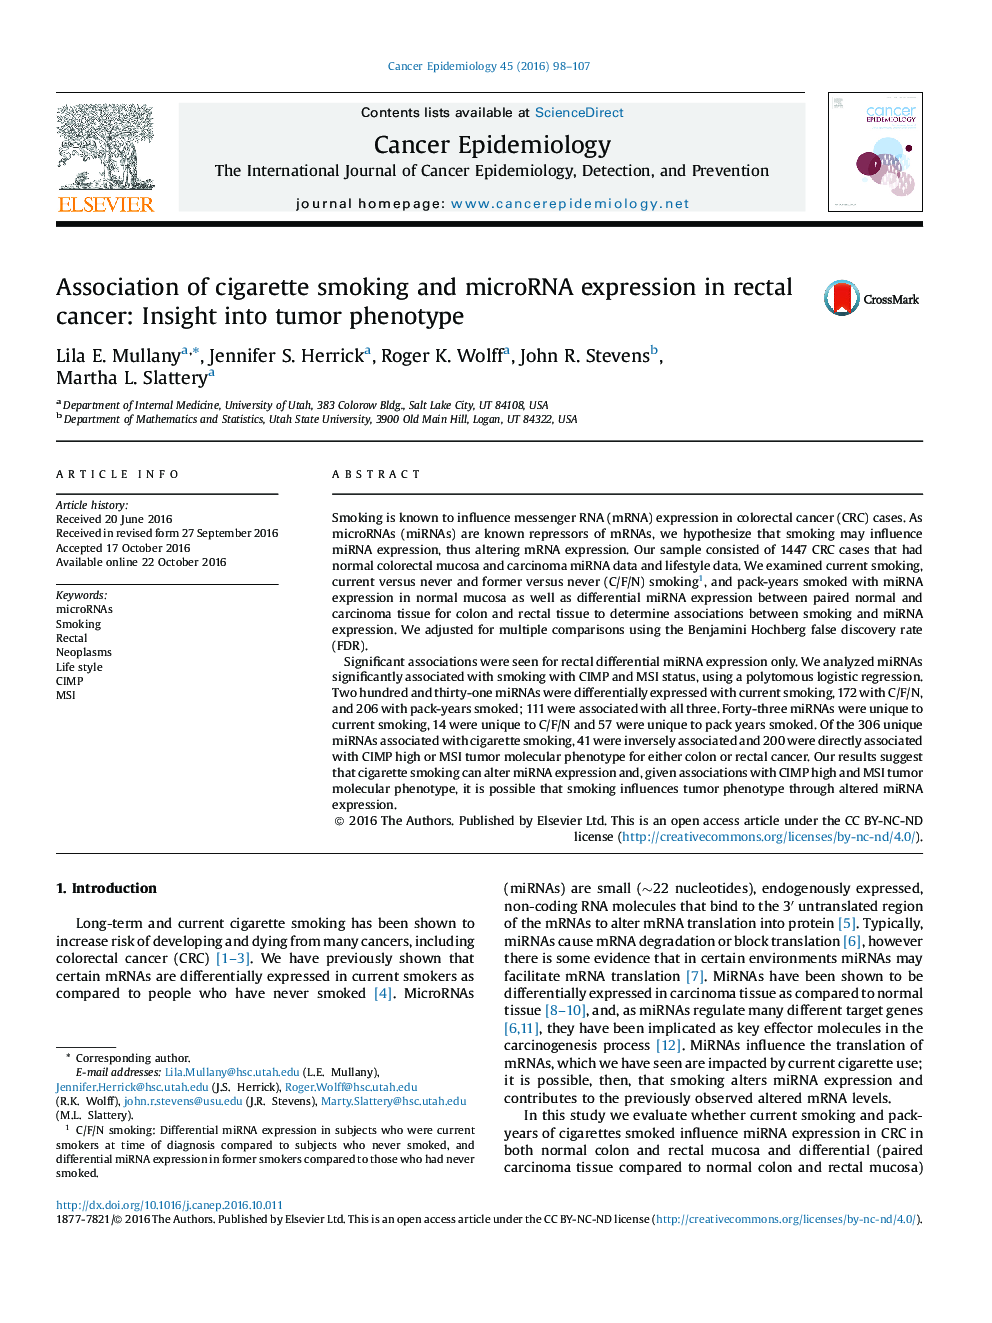 Association of cigarette smoking and microRNA expression in rectal cancer: Insight into tumor phenotype